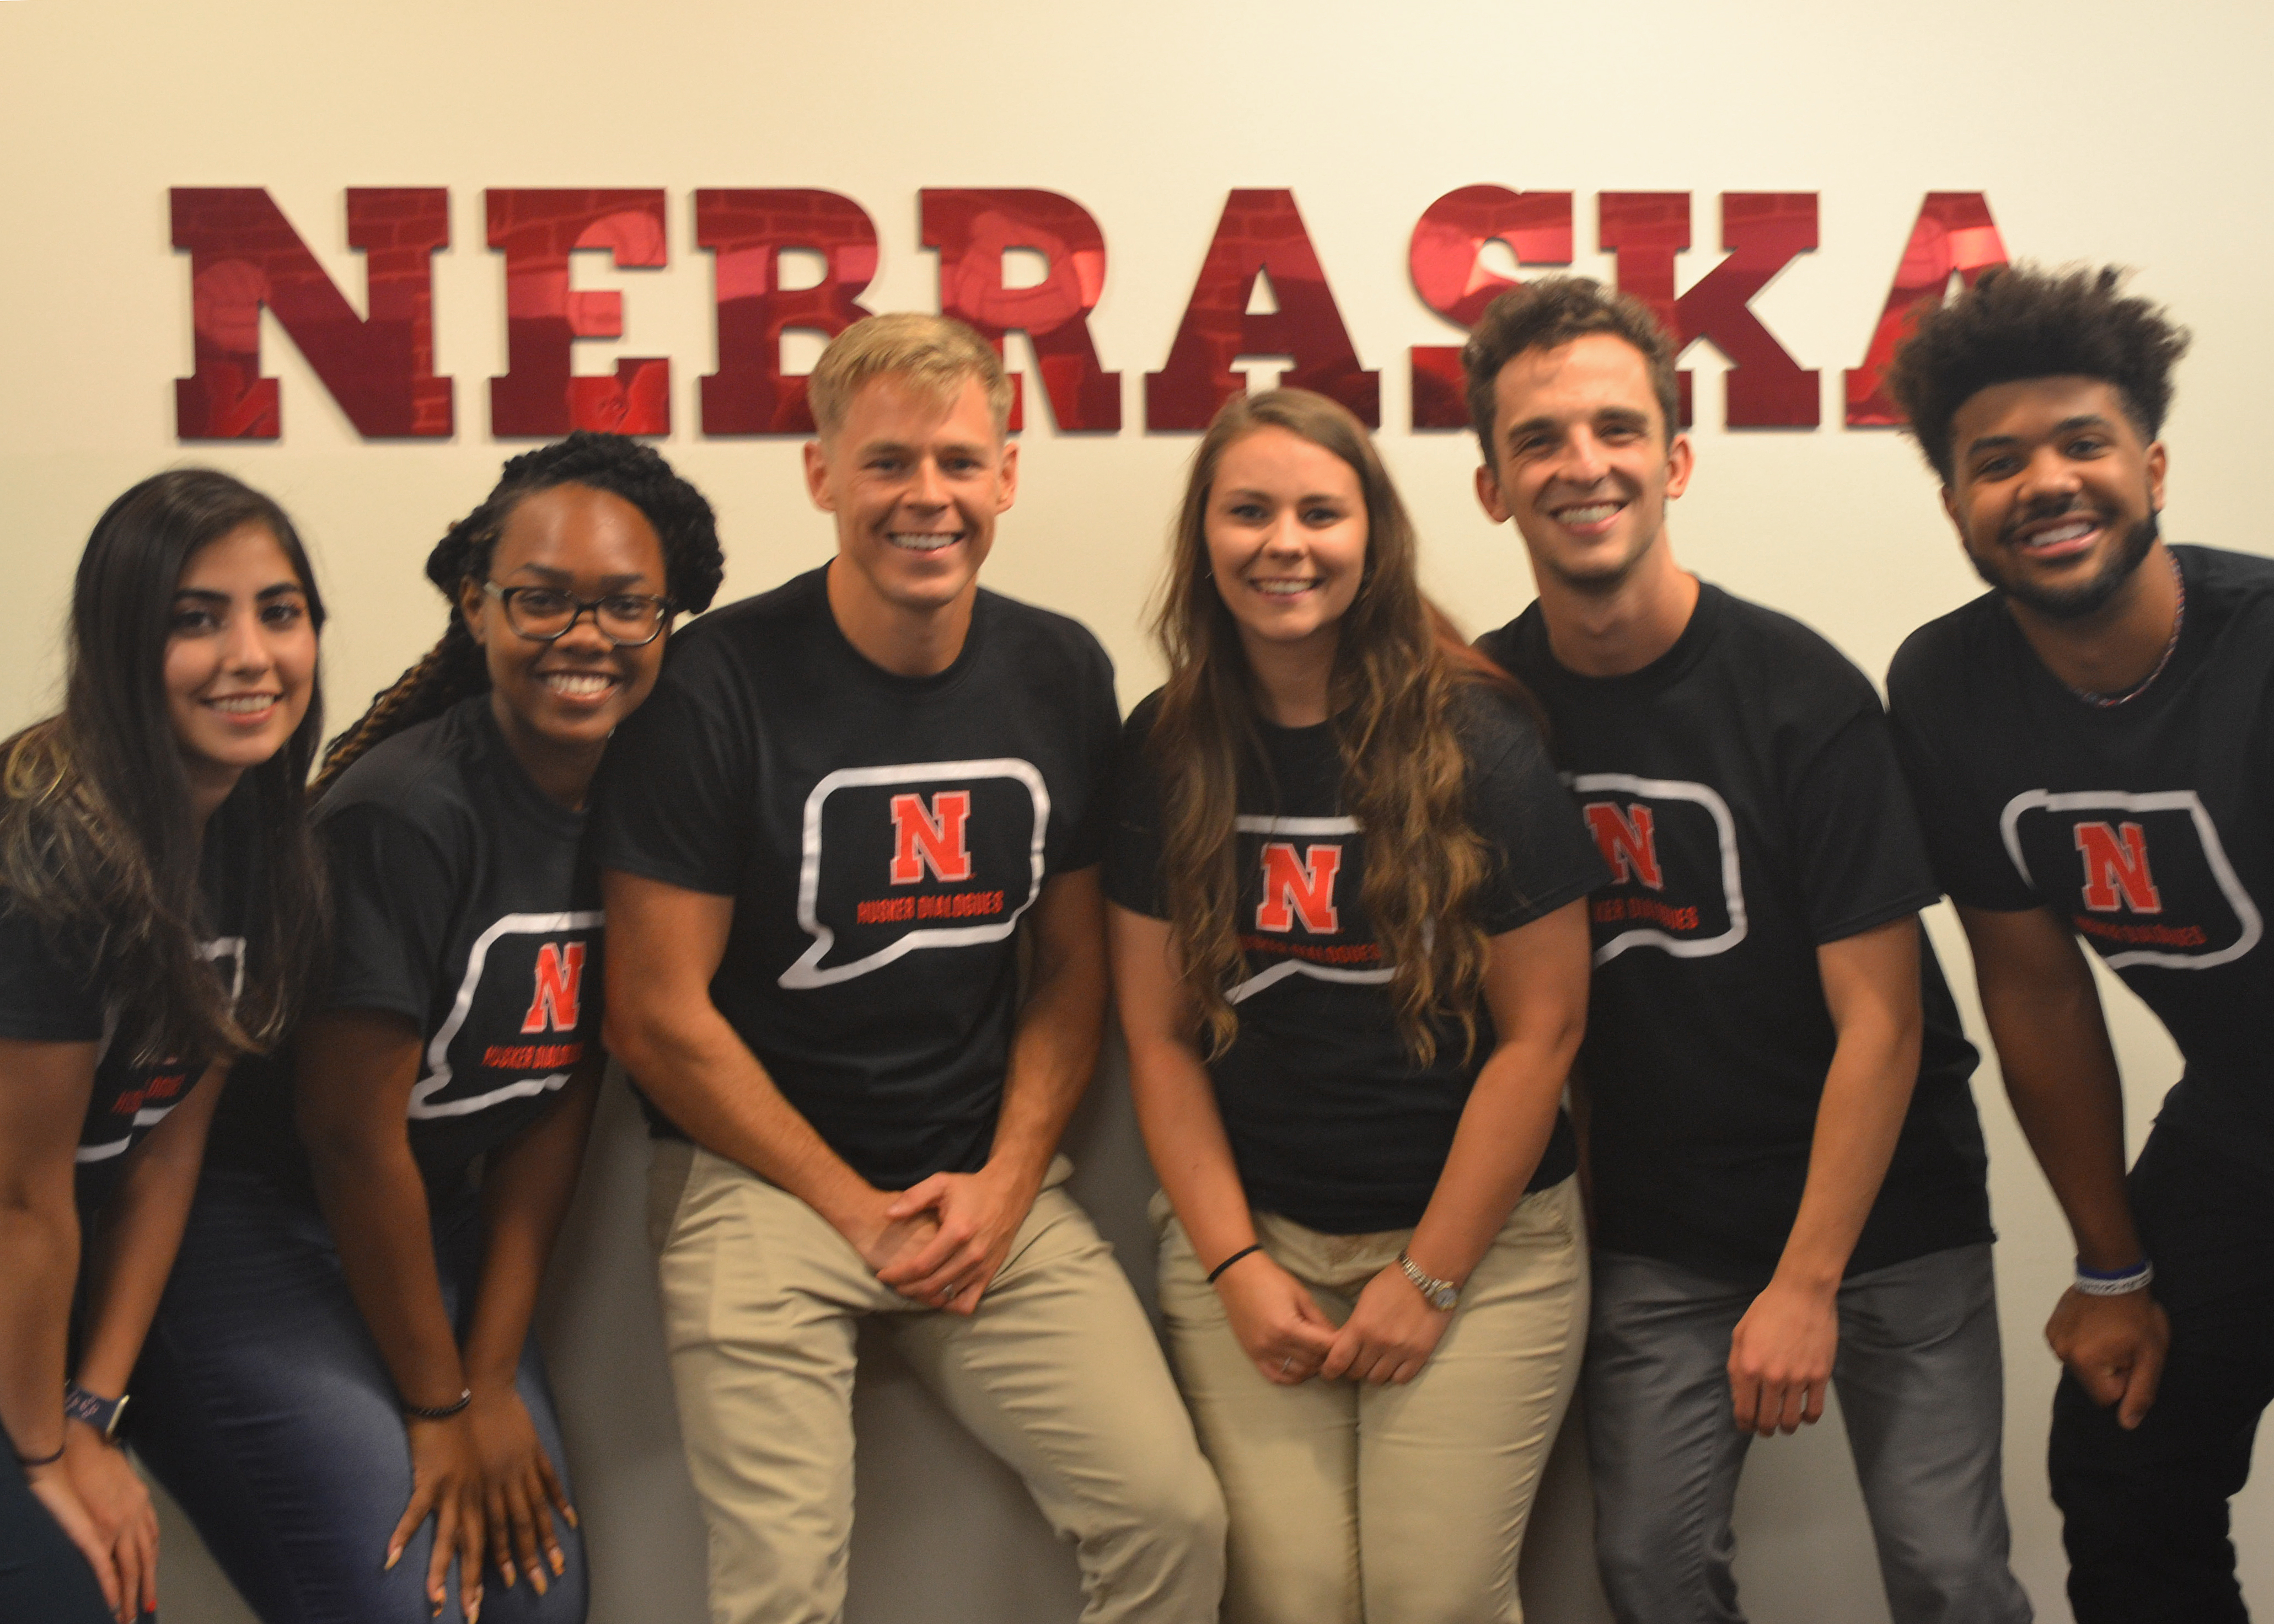 Husker Dialogues Husker Dialogues Undergraduates interested in sharing their experiences at Husker Dialogues are invited to submit 2.5-page stories by February 15.